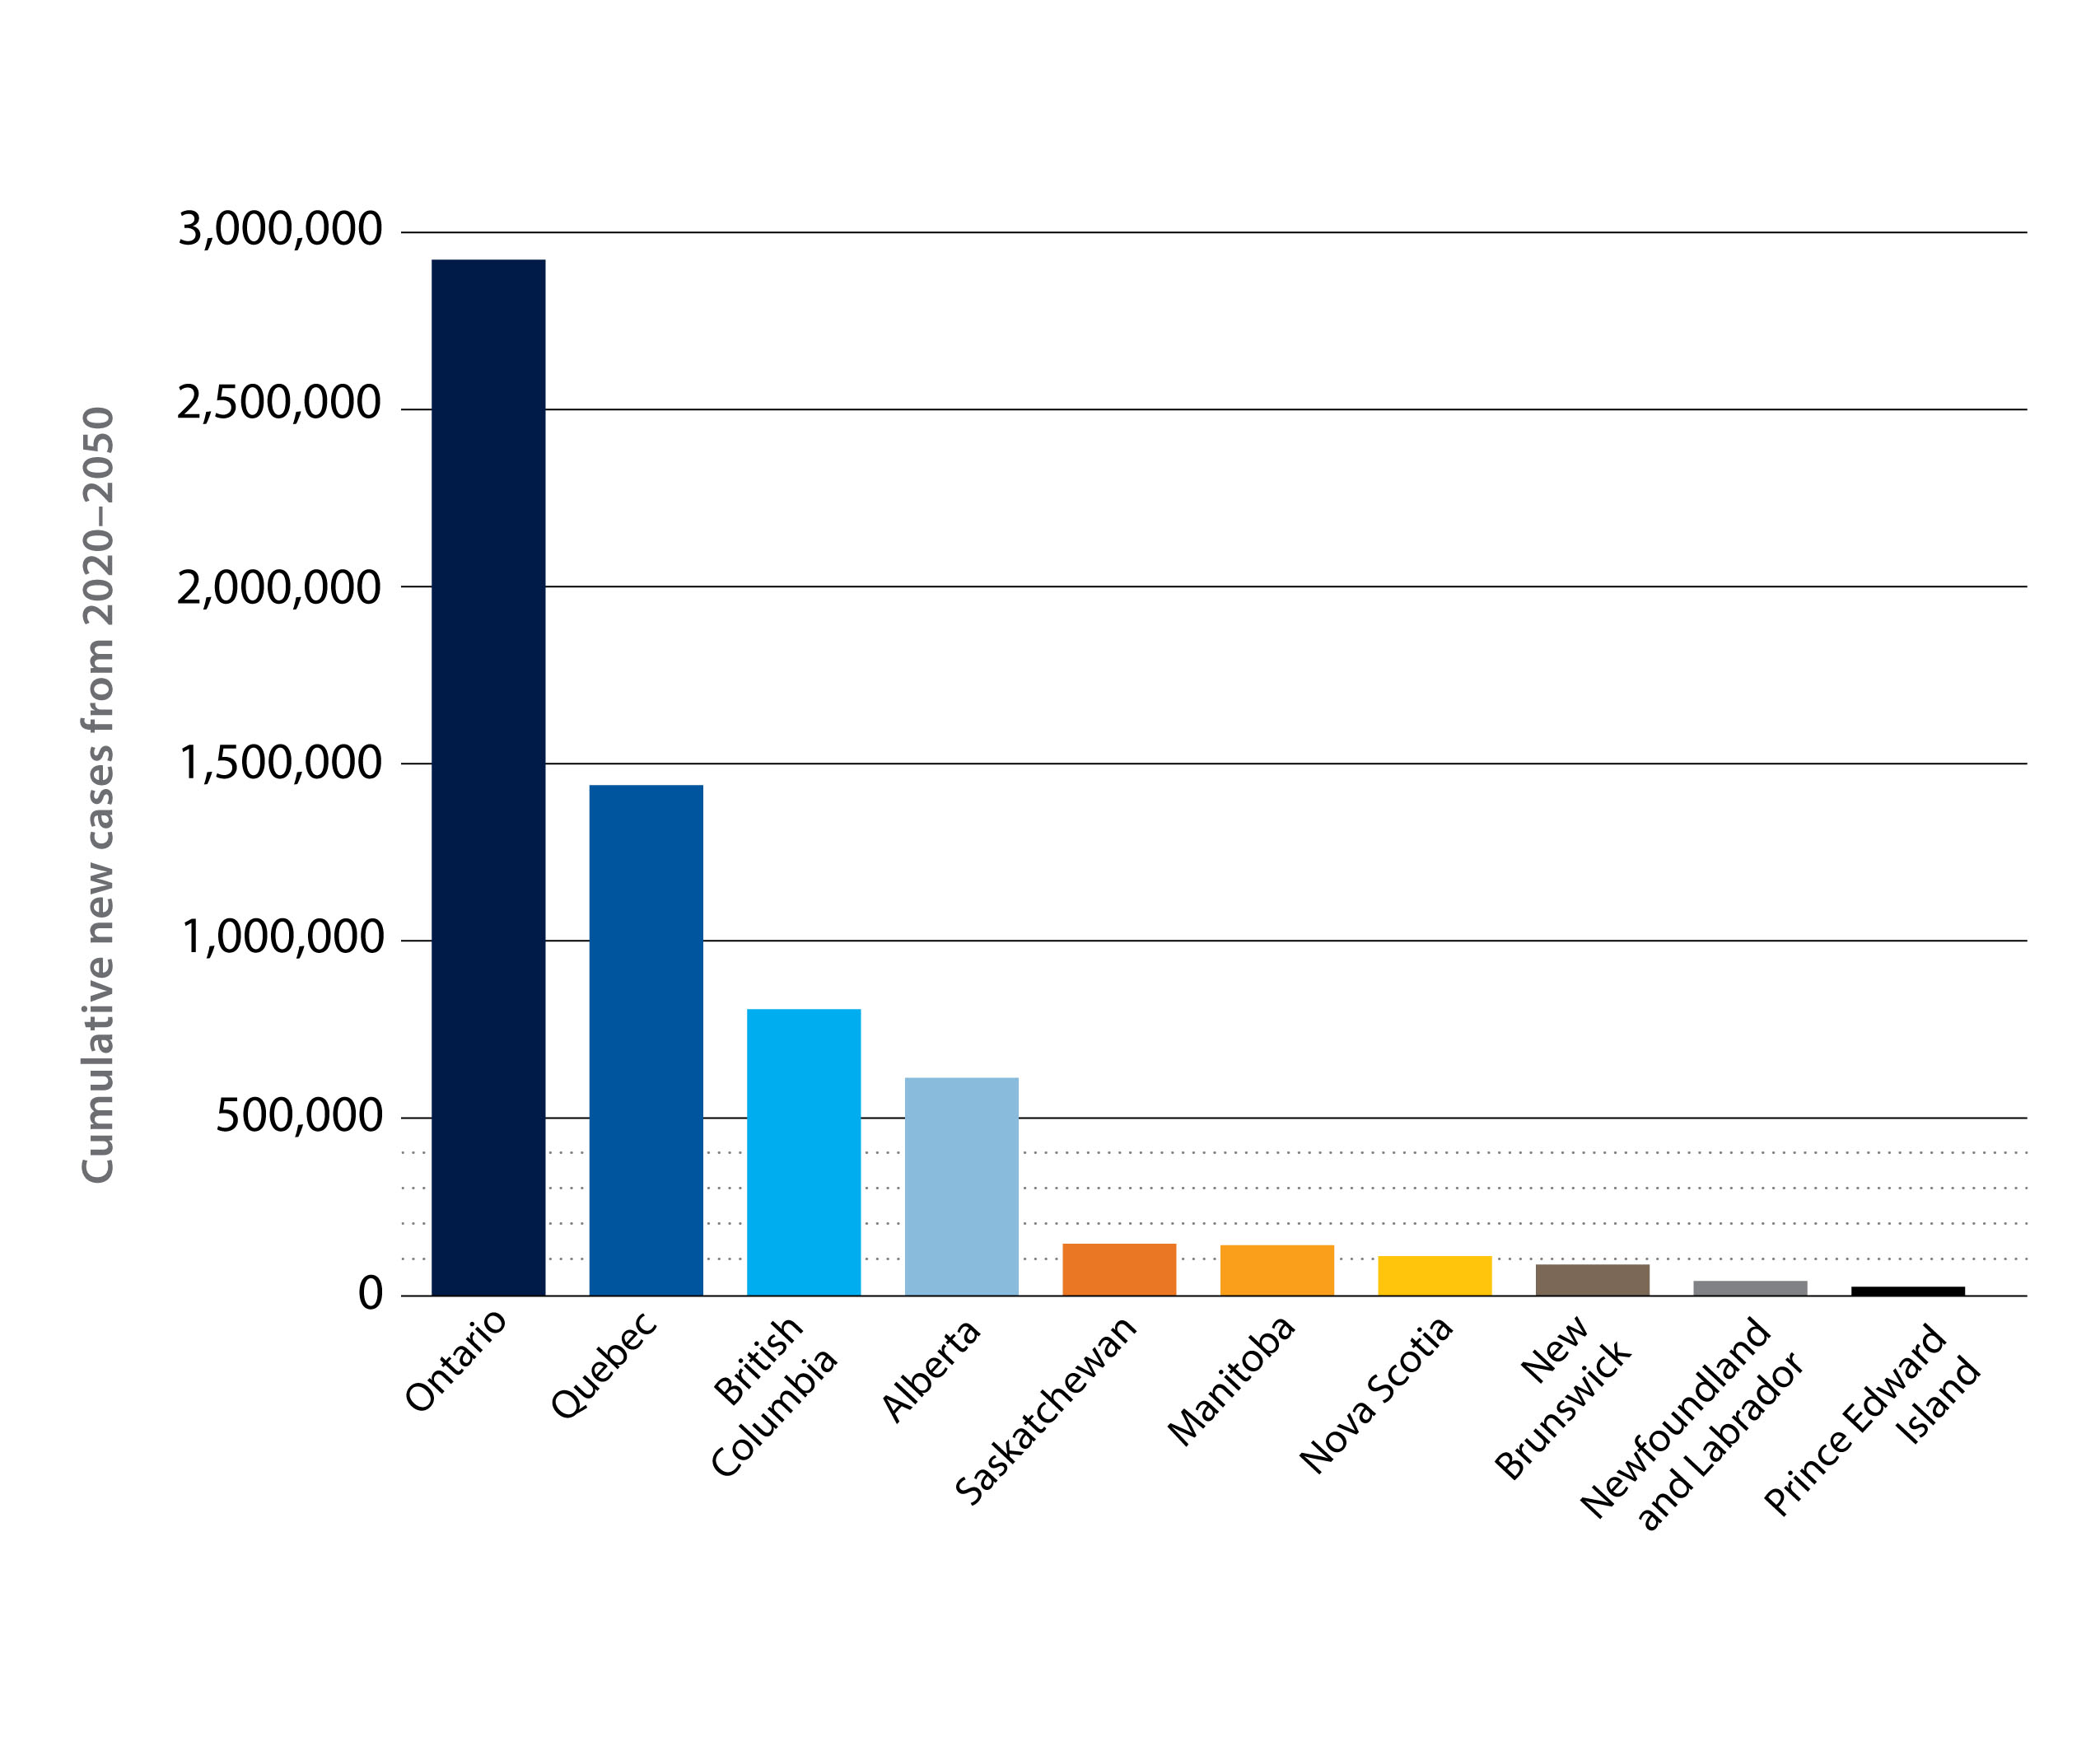 Bar chart showing total new cases of dementia by type and region, 2020 to 2050